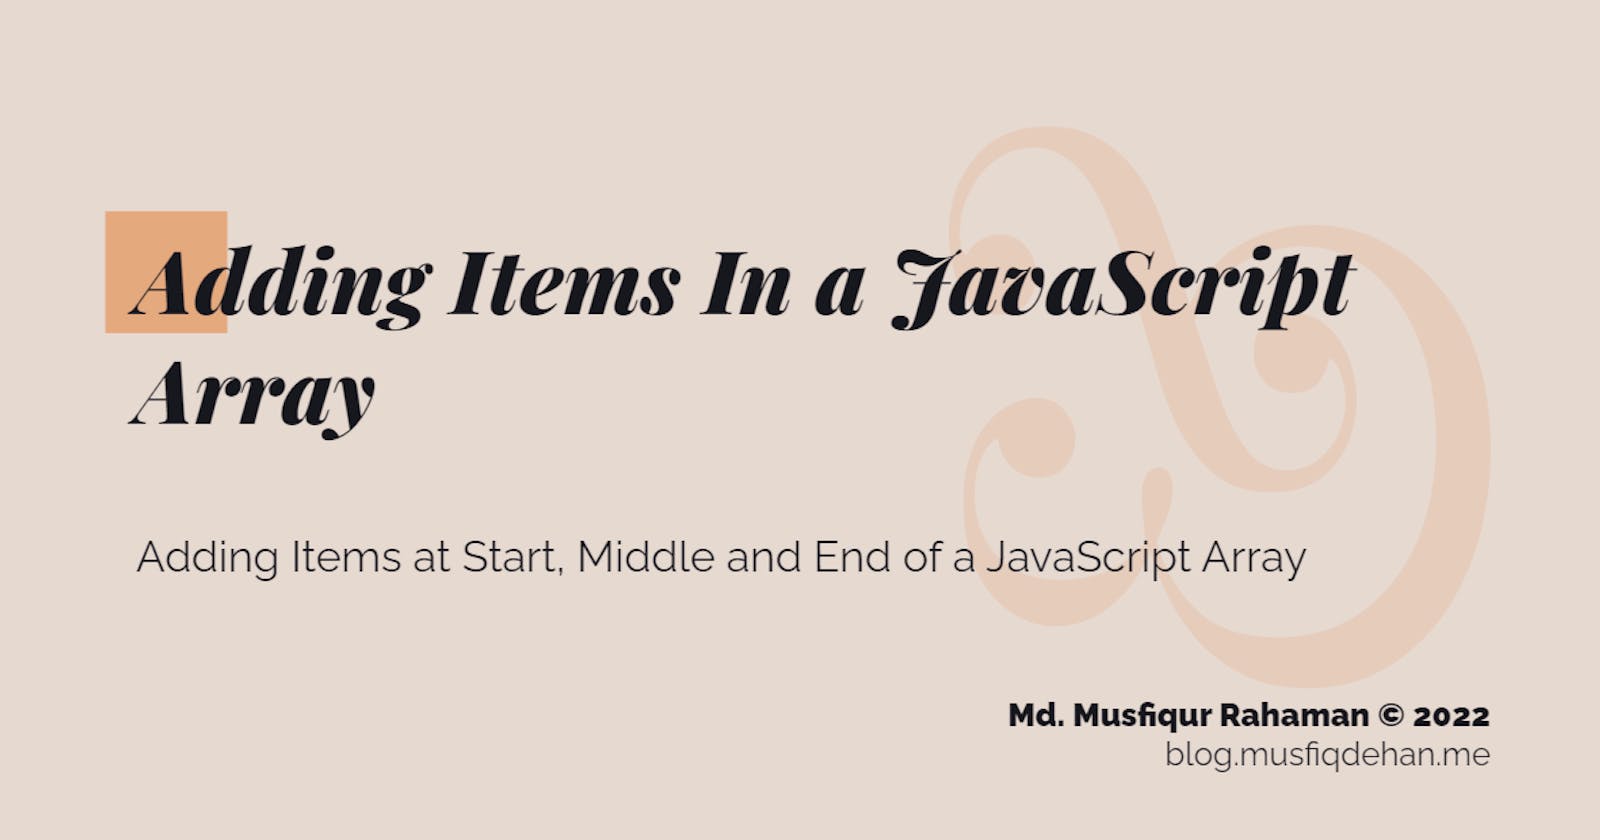 Adding Items in a JavaScript Array